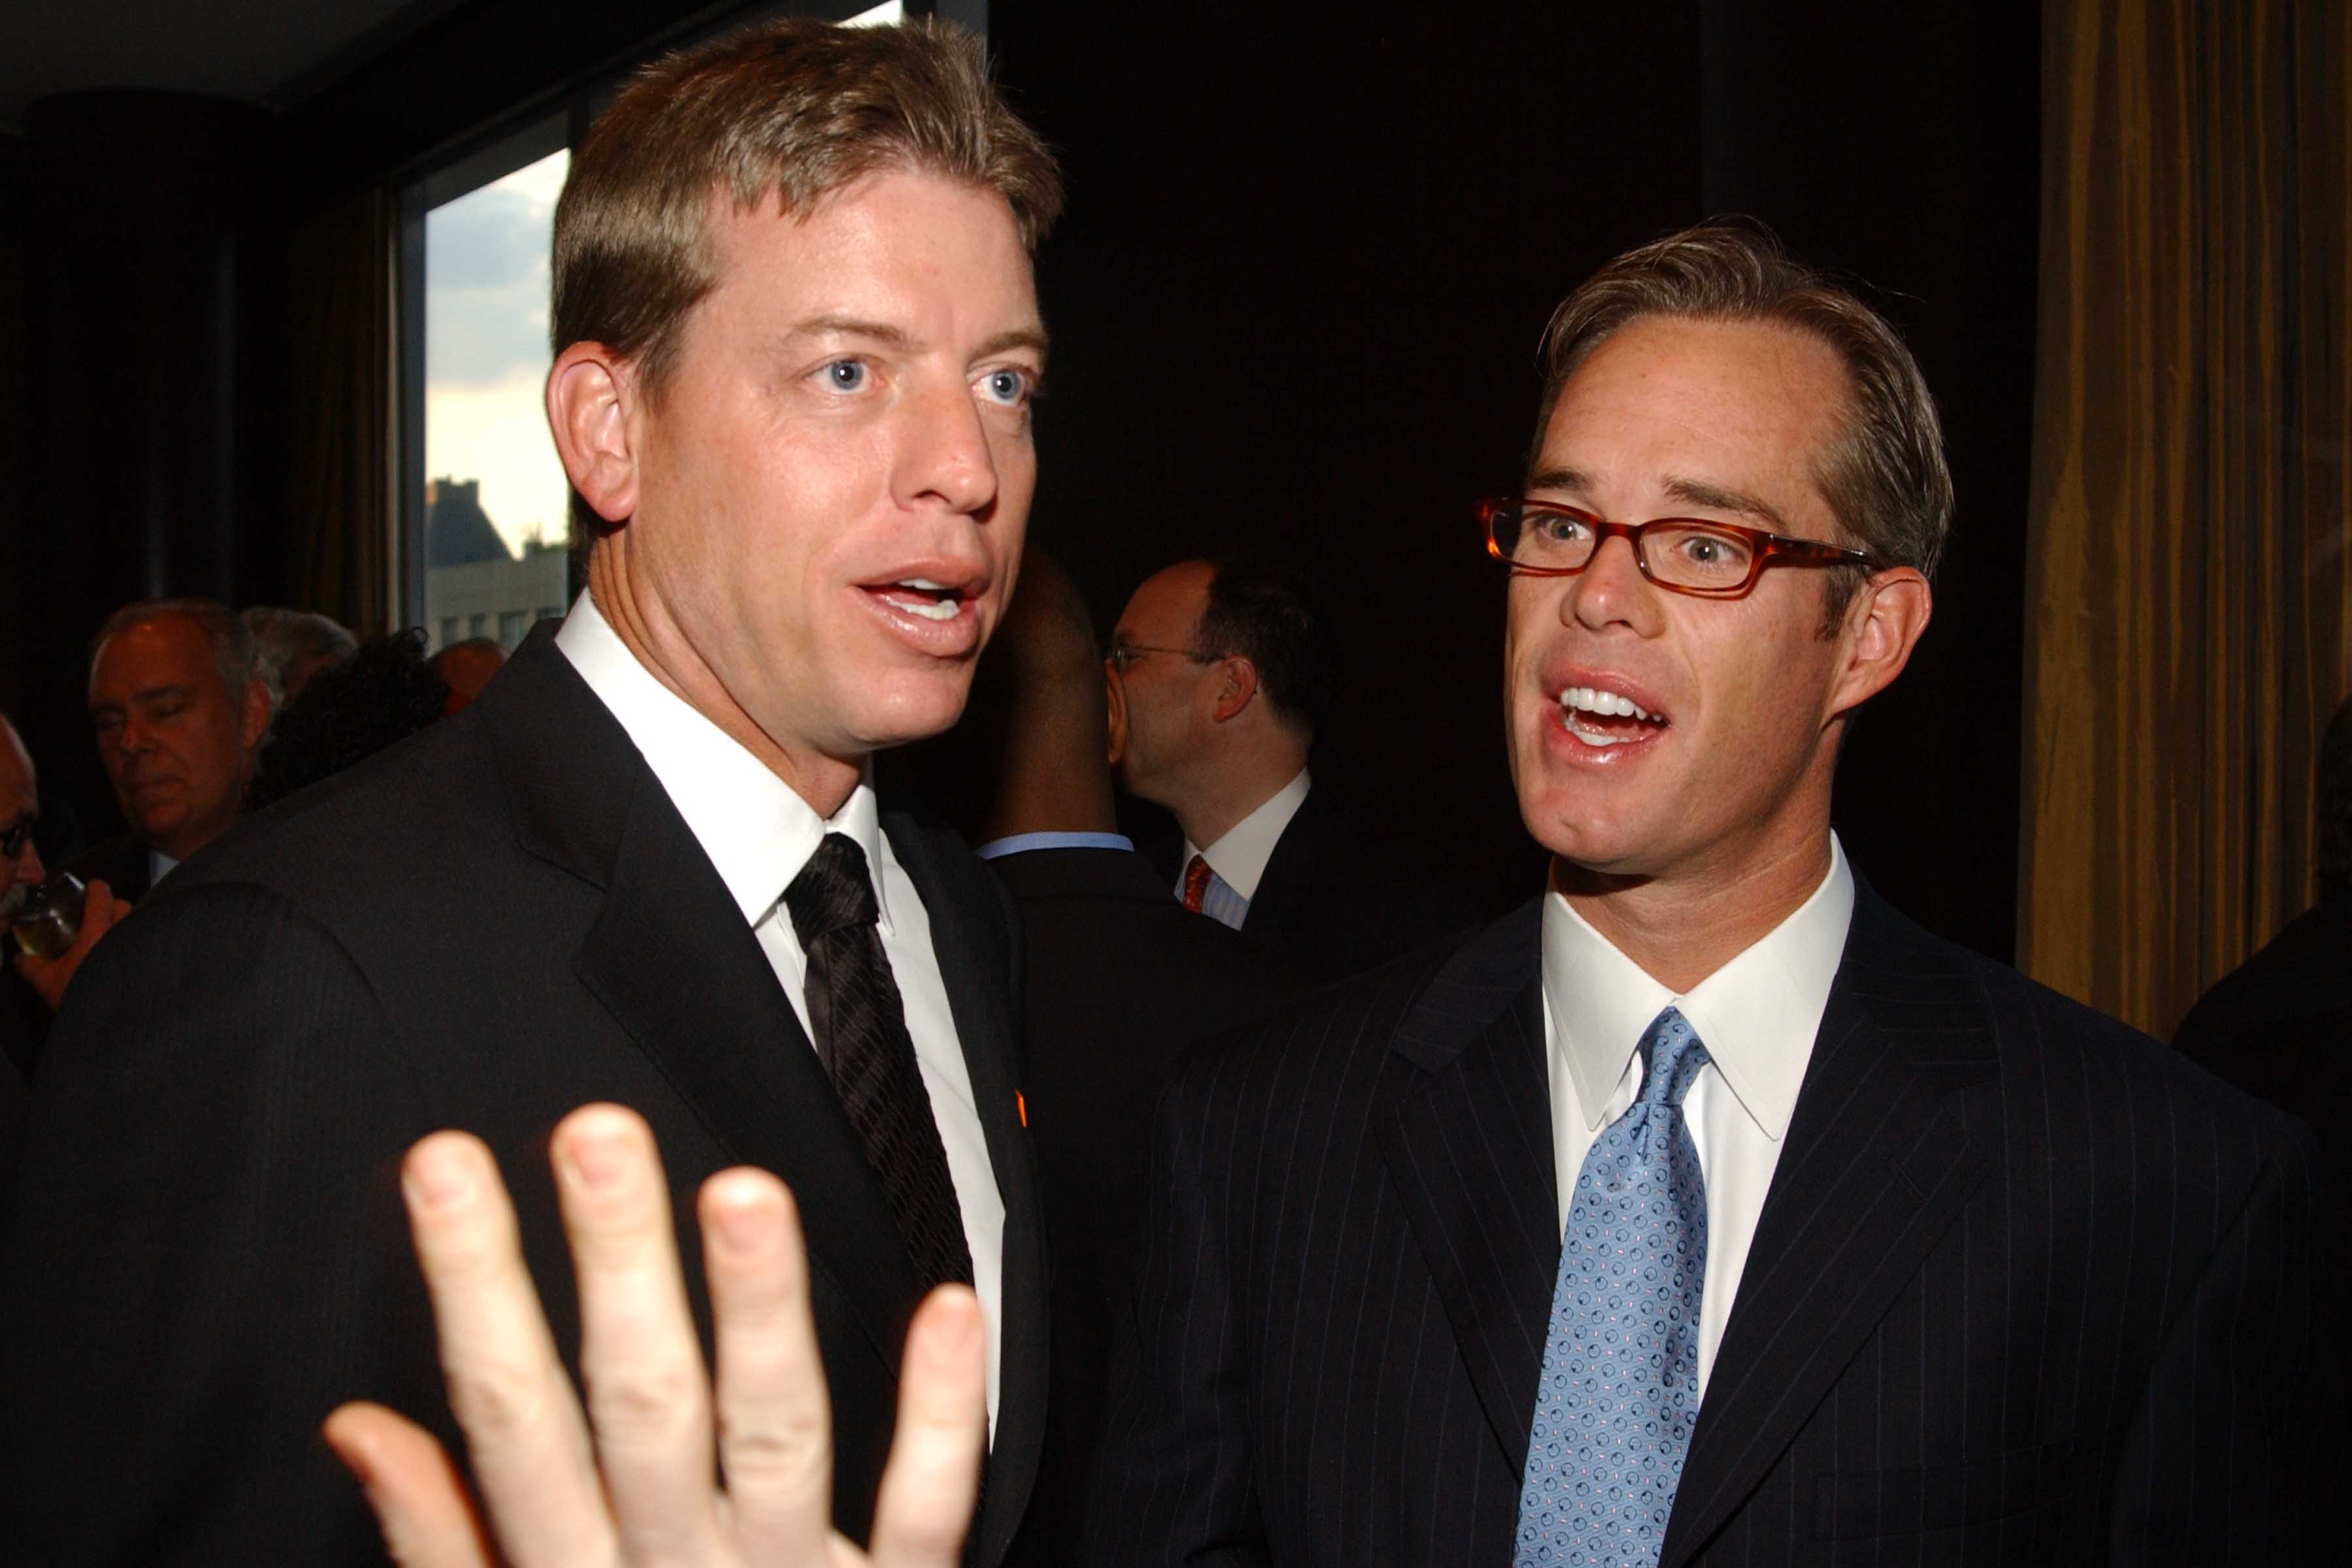 Troy Aikman and Joe Buck were not happy to be in Tampa on Sunday